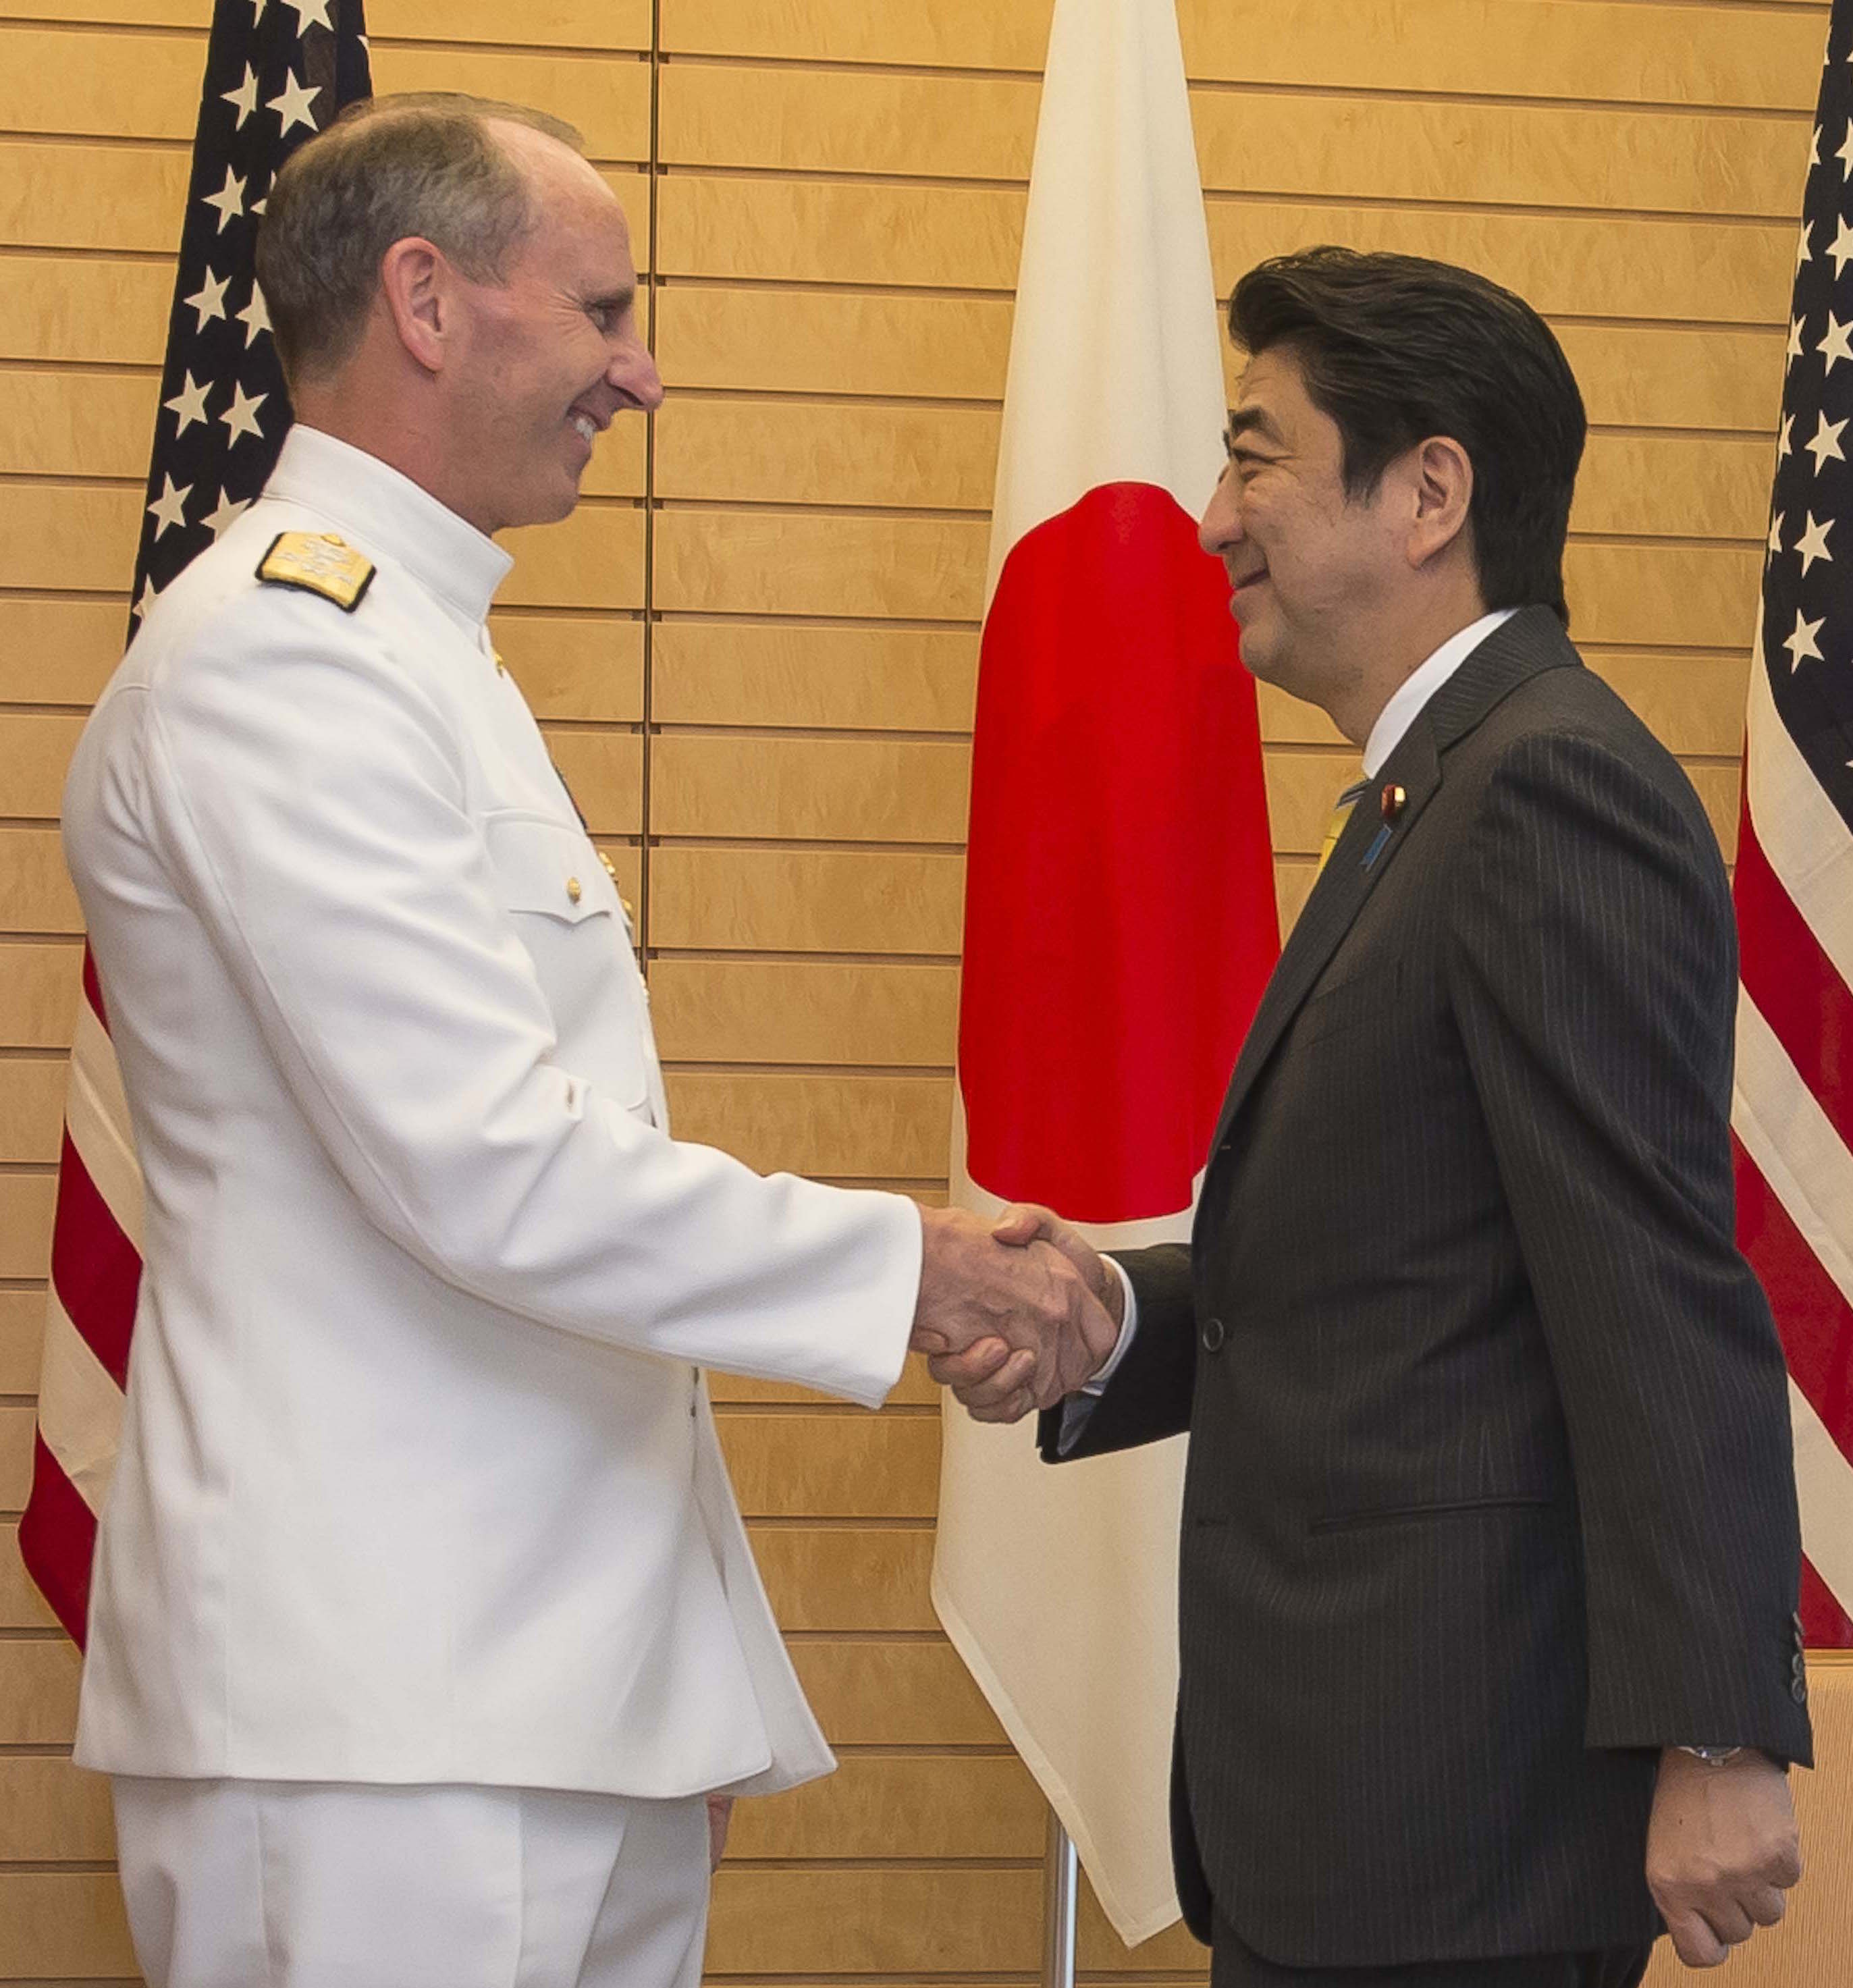  Chief of Naval Operations Adm. Jonathan Greenert meets with the Prime Minister of Japan Shinzo Abe on May 26, 2014. US Navy Photo